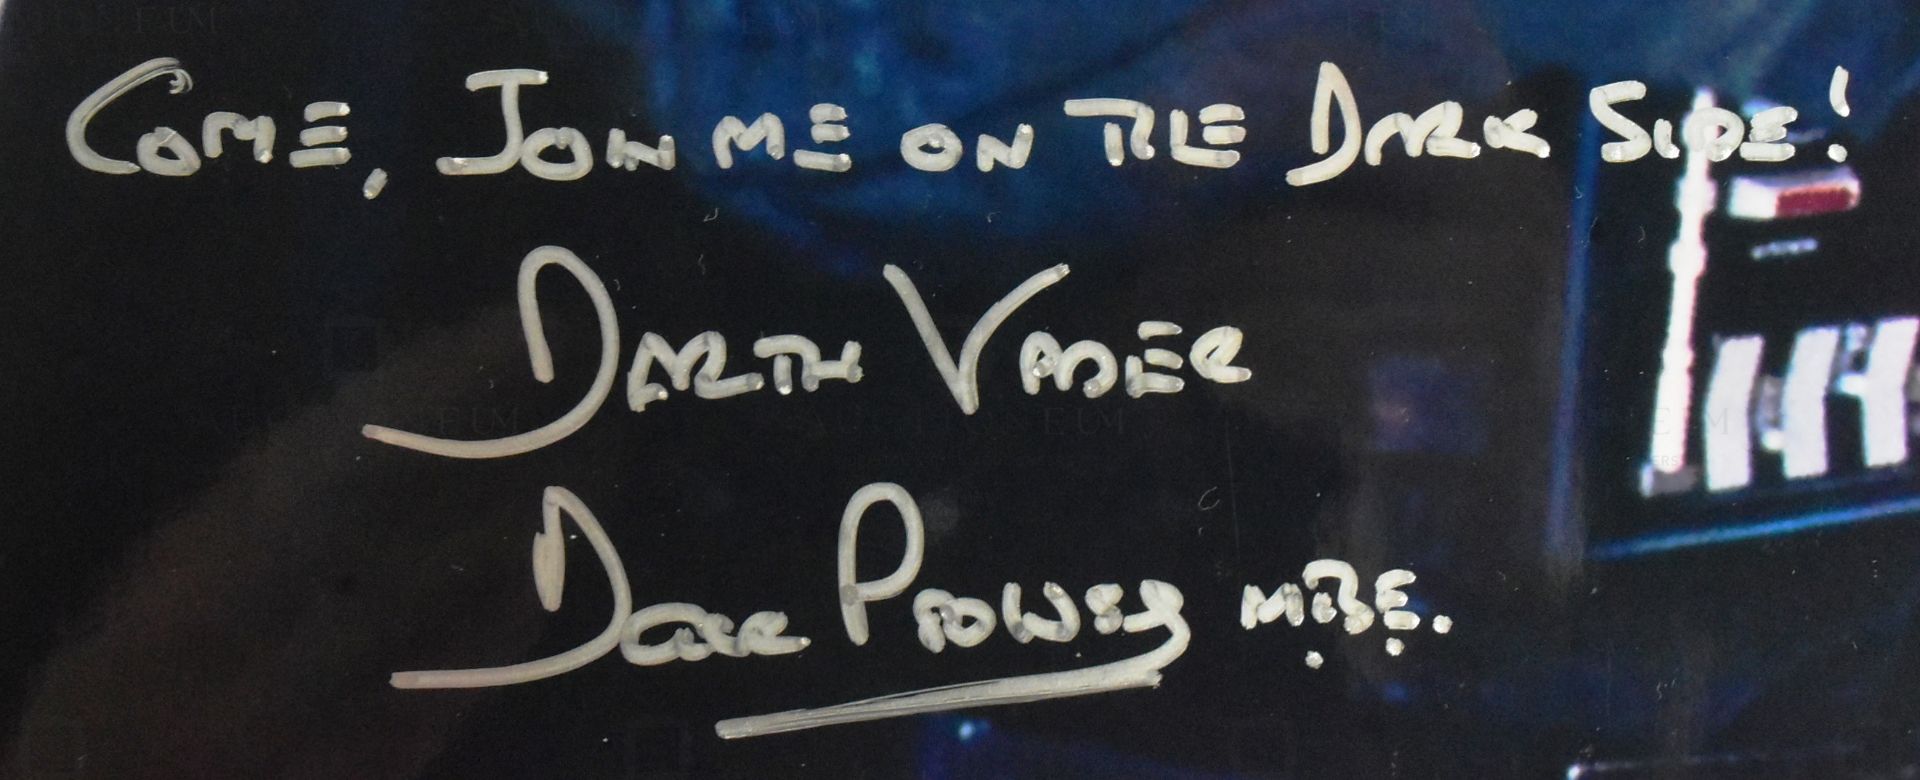 ESTATE OF DAVE PROWSE - STAR WARS - SIGNED 8X12" PHOTO - Image 2 of 2